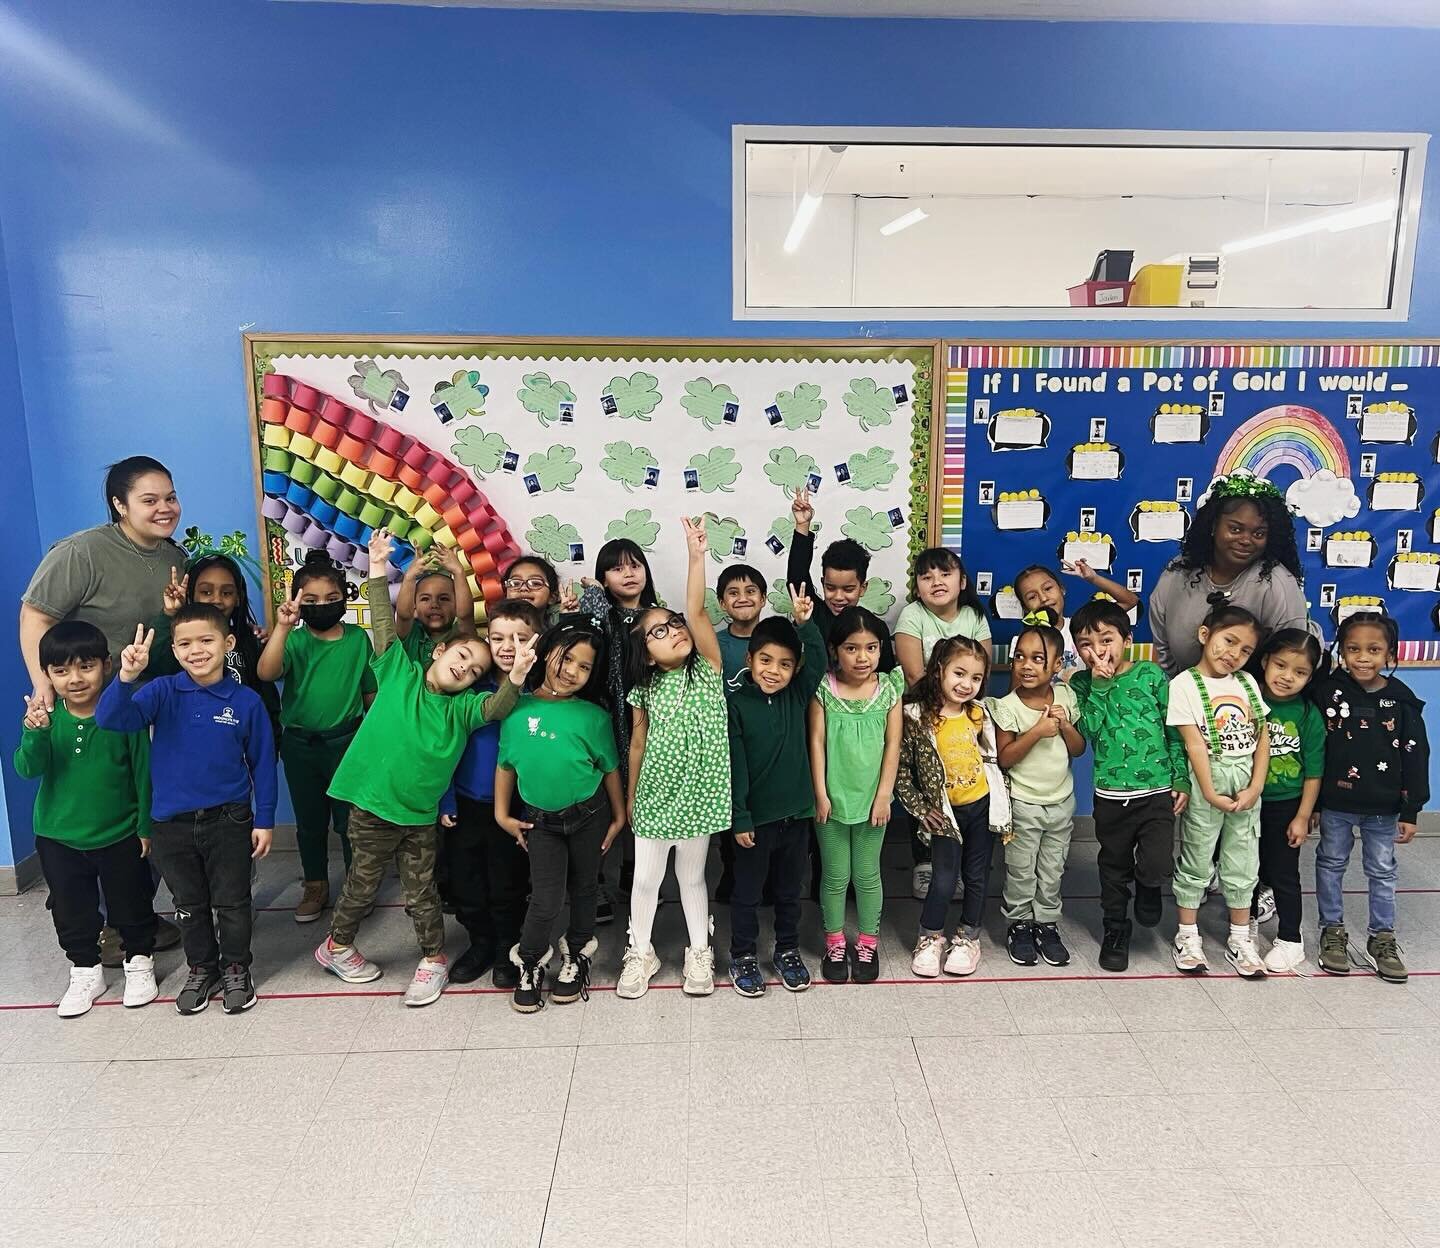 Happy St. Patrick&rsquo;s Day from Brooklyn RISE! 🤗☘️🇮🇪
.
Last week students celebrated the holiday by dressing in green, engineering their own &ldquo;leprechaun traps&rdquo;, and enjoying the warm spring weather at the playground! 💚
.
#brooklynR